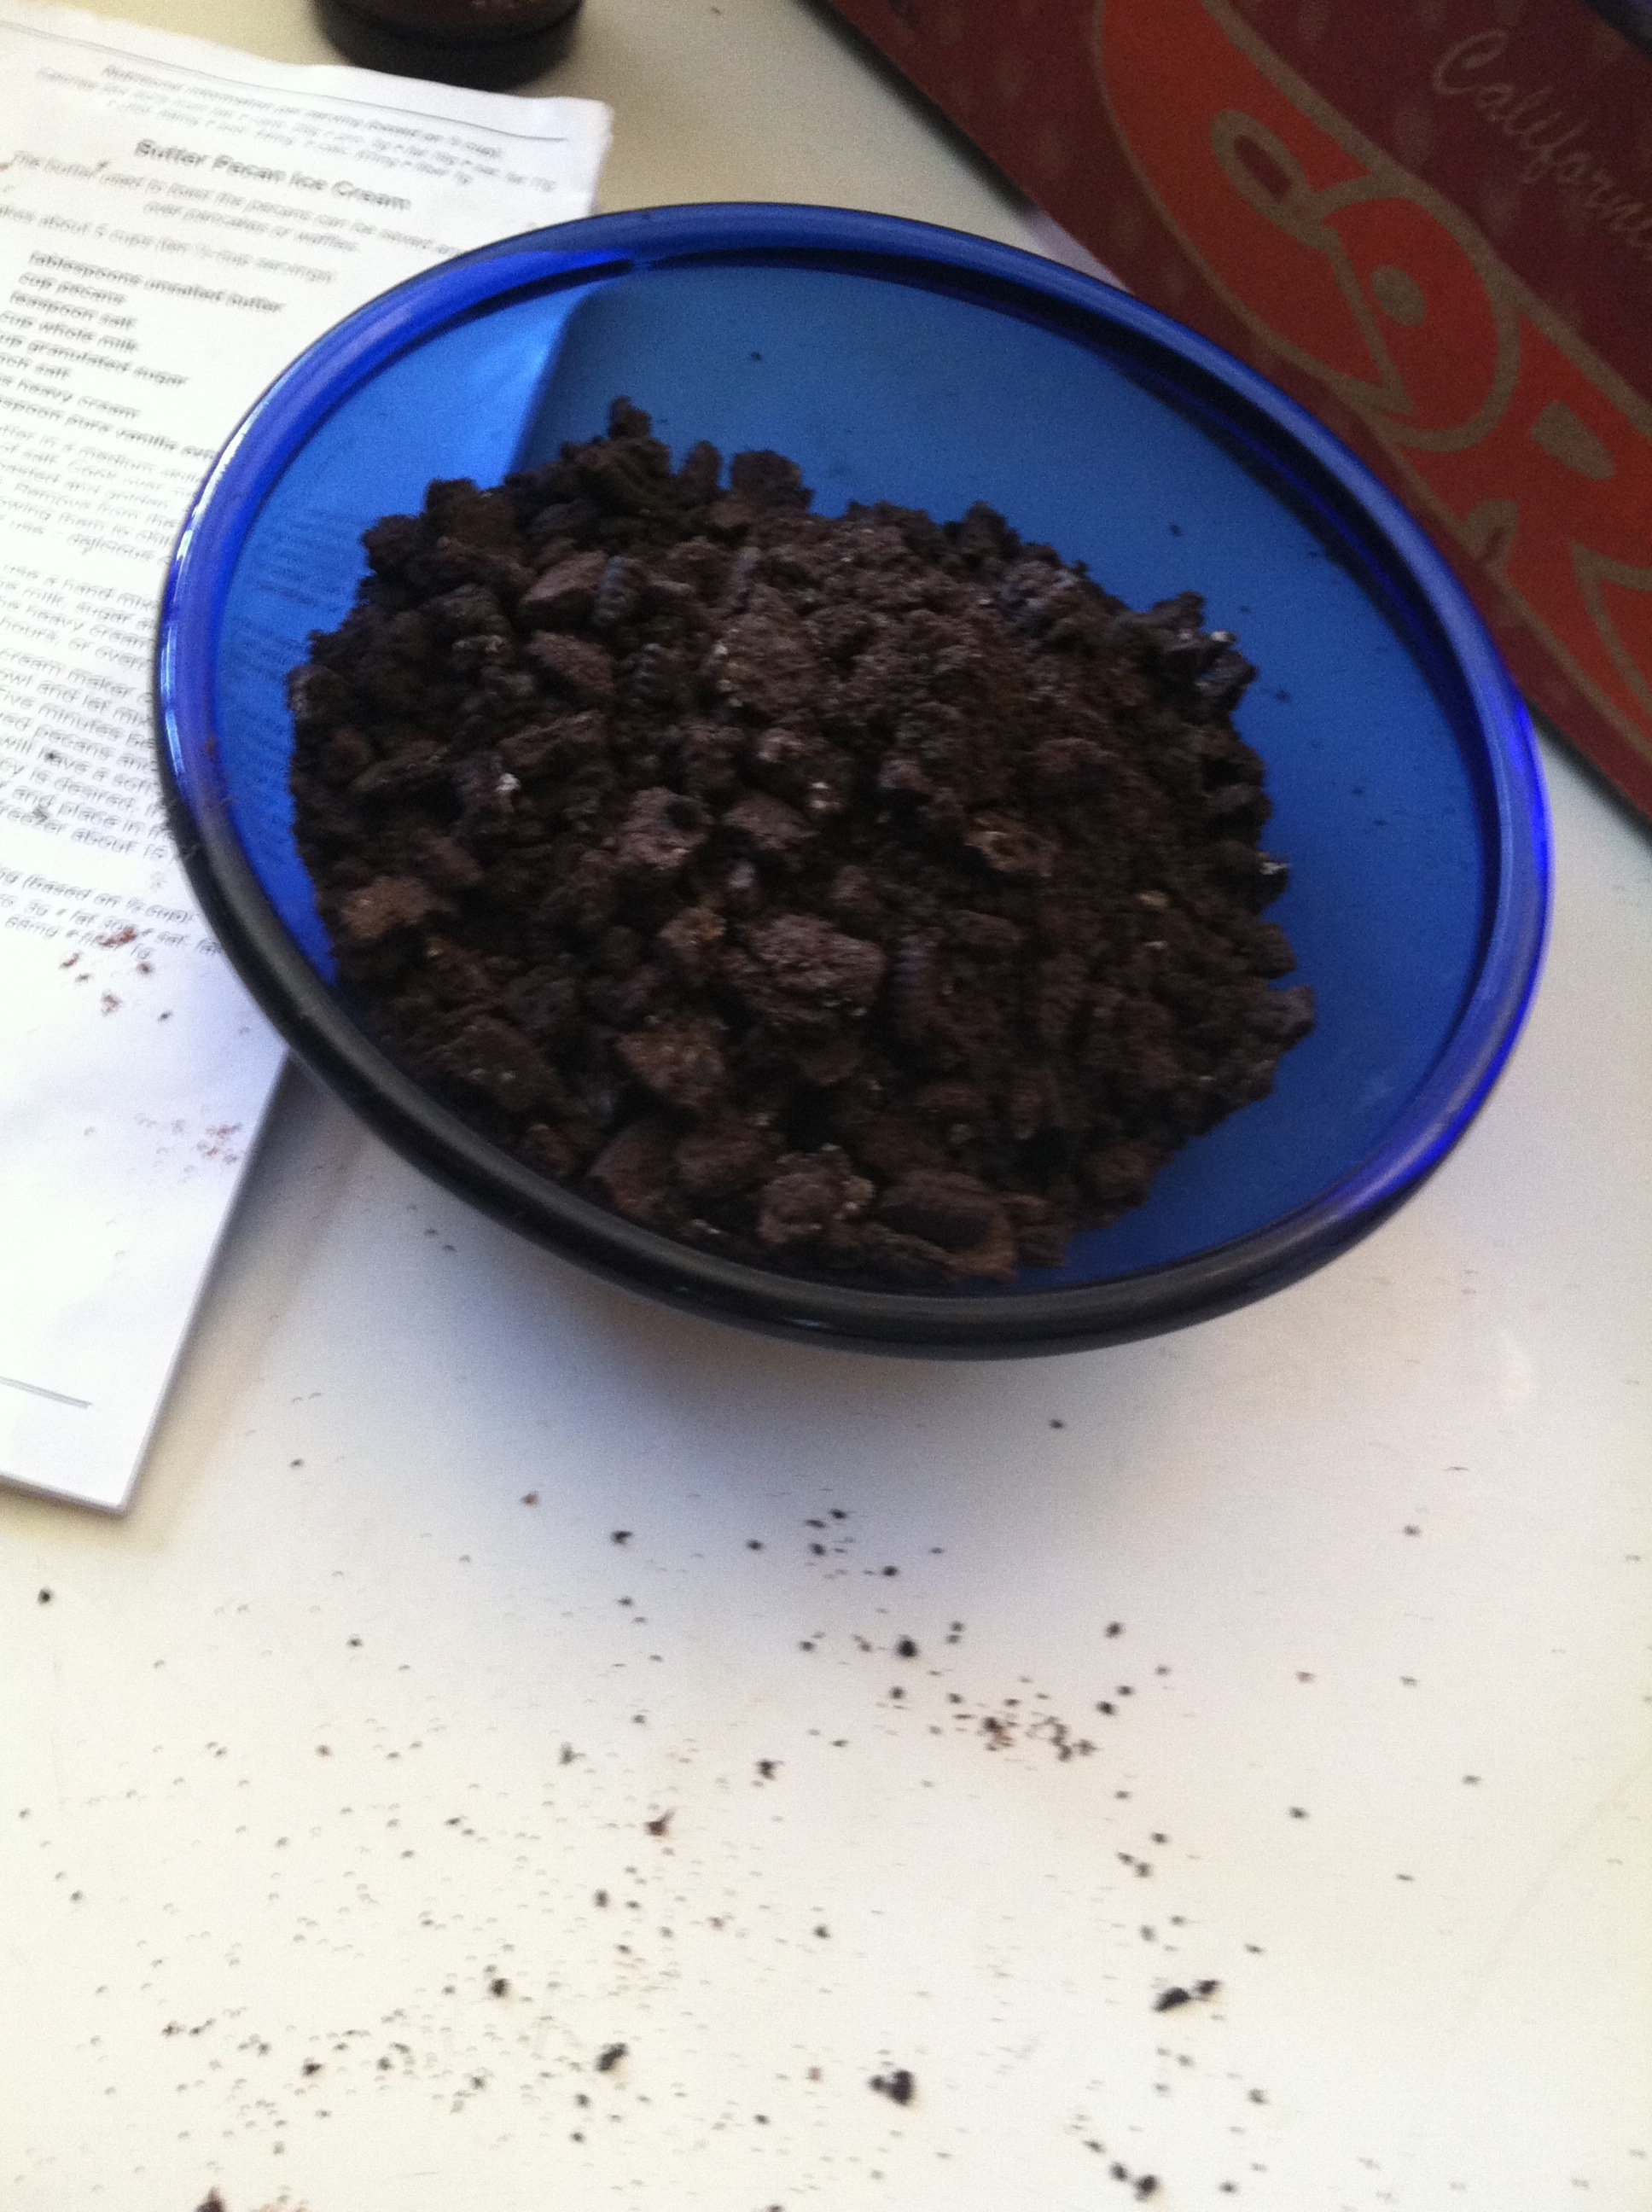 And crumbling up oreo cookies, as well as mixing cream, milk, cocoa powder, and the like.